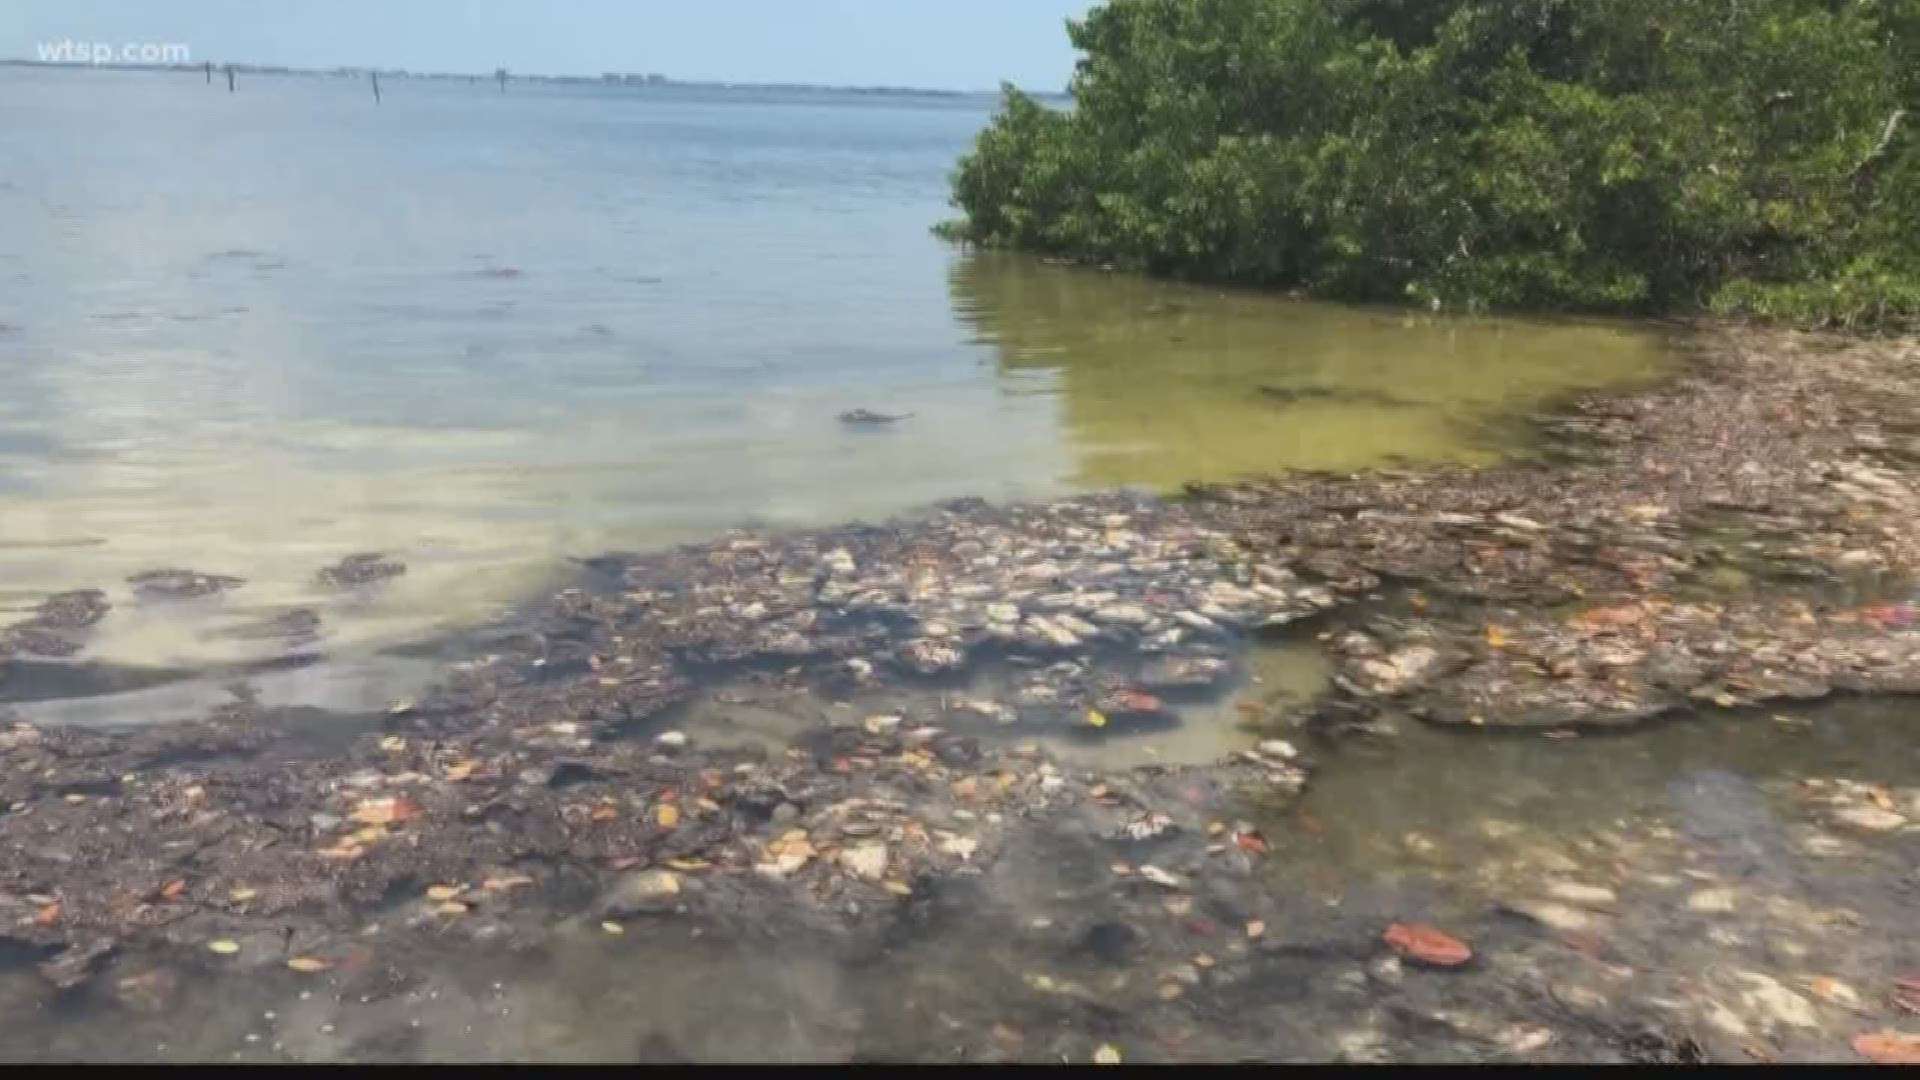 Algae popping up in Sarasota Bay. This time it is not red tide, it is blue-green algae. But it smells and there are things you need to know about this algae. 
When it comes to exposure, the Florida Department of Health recommends staying away from both algaes.